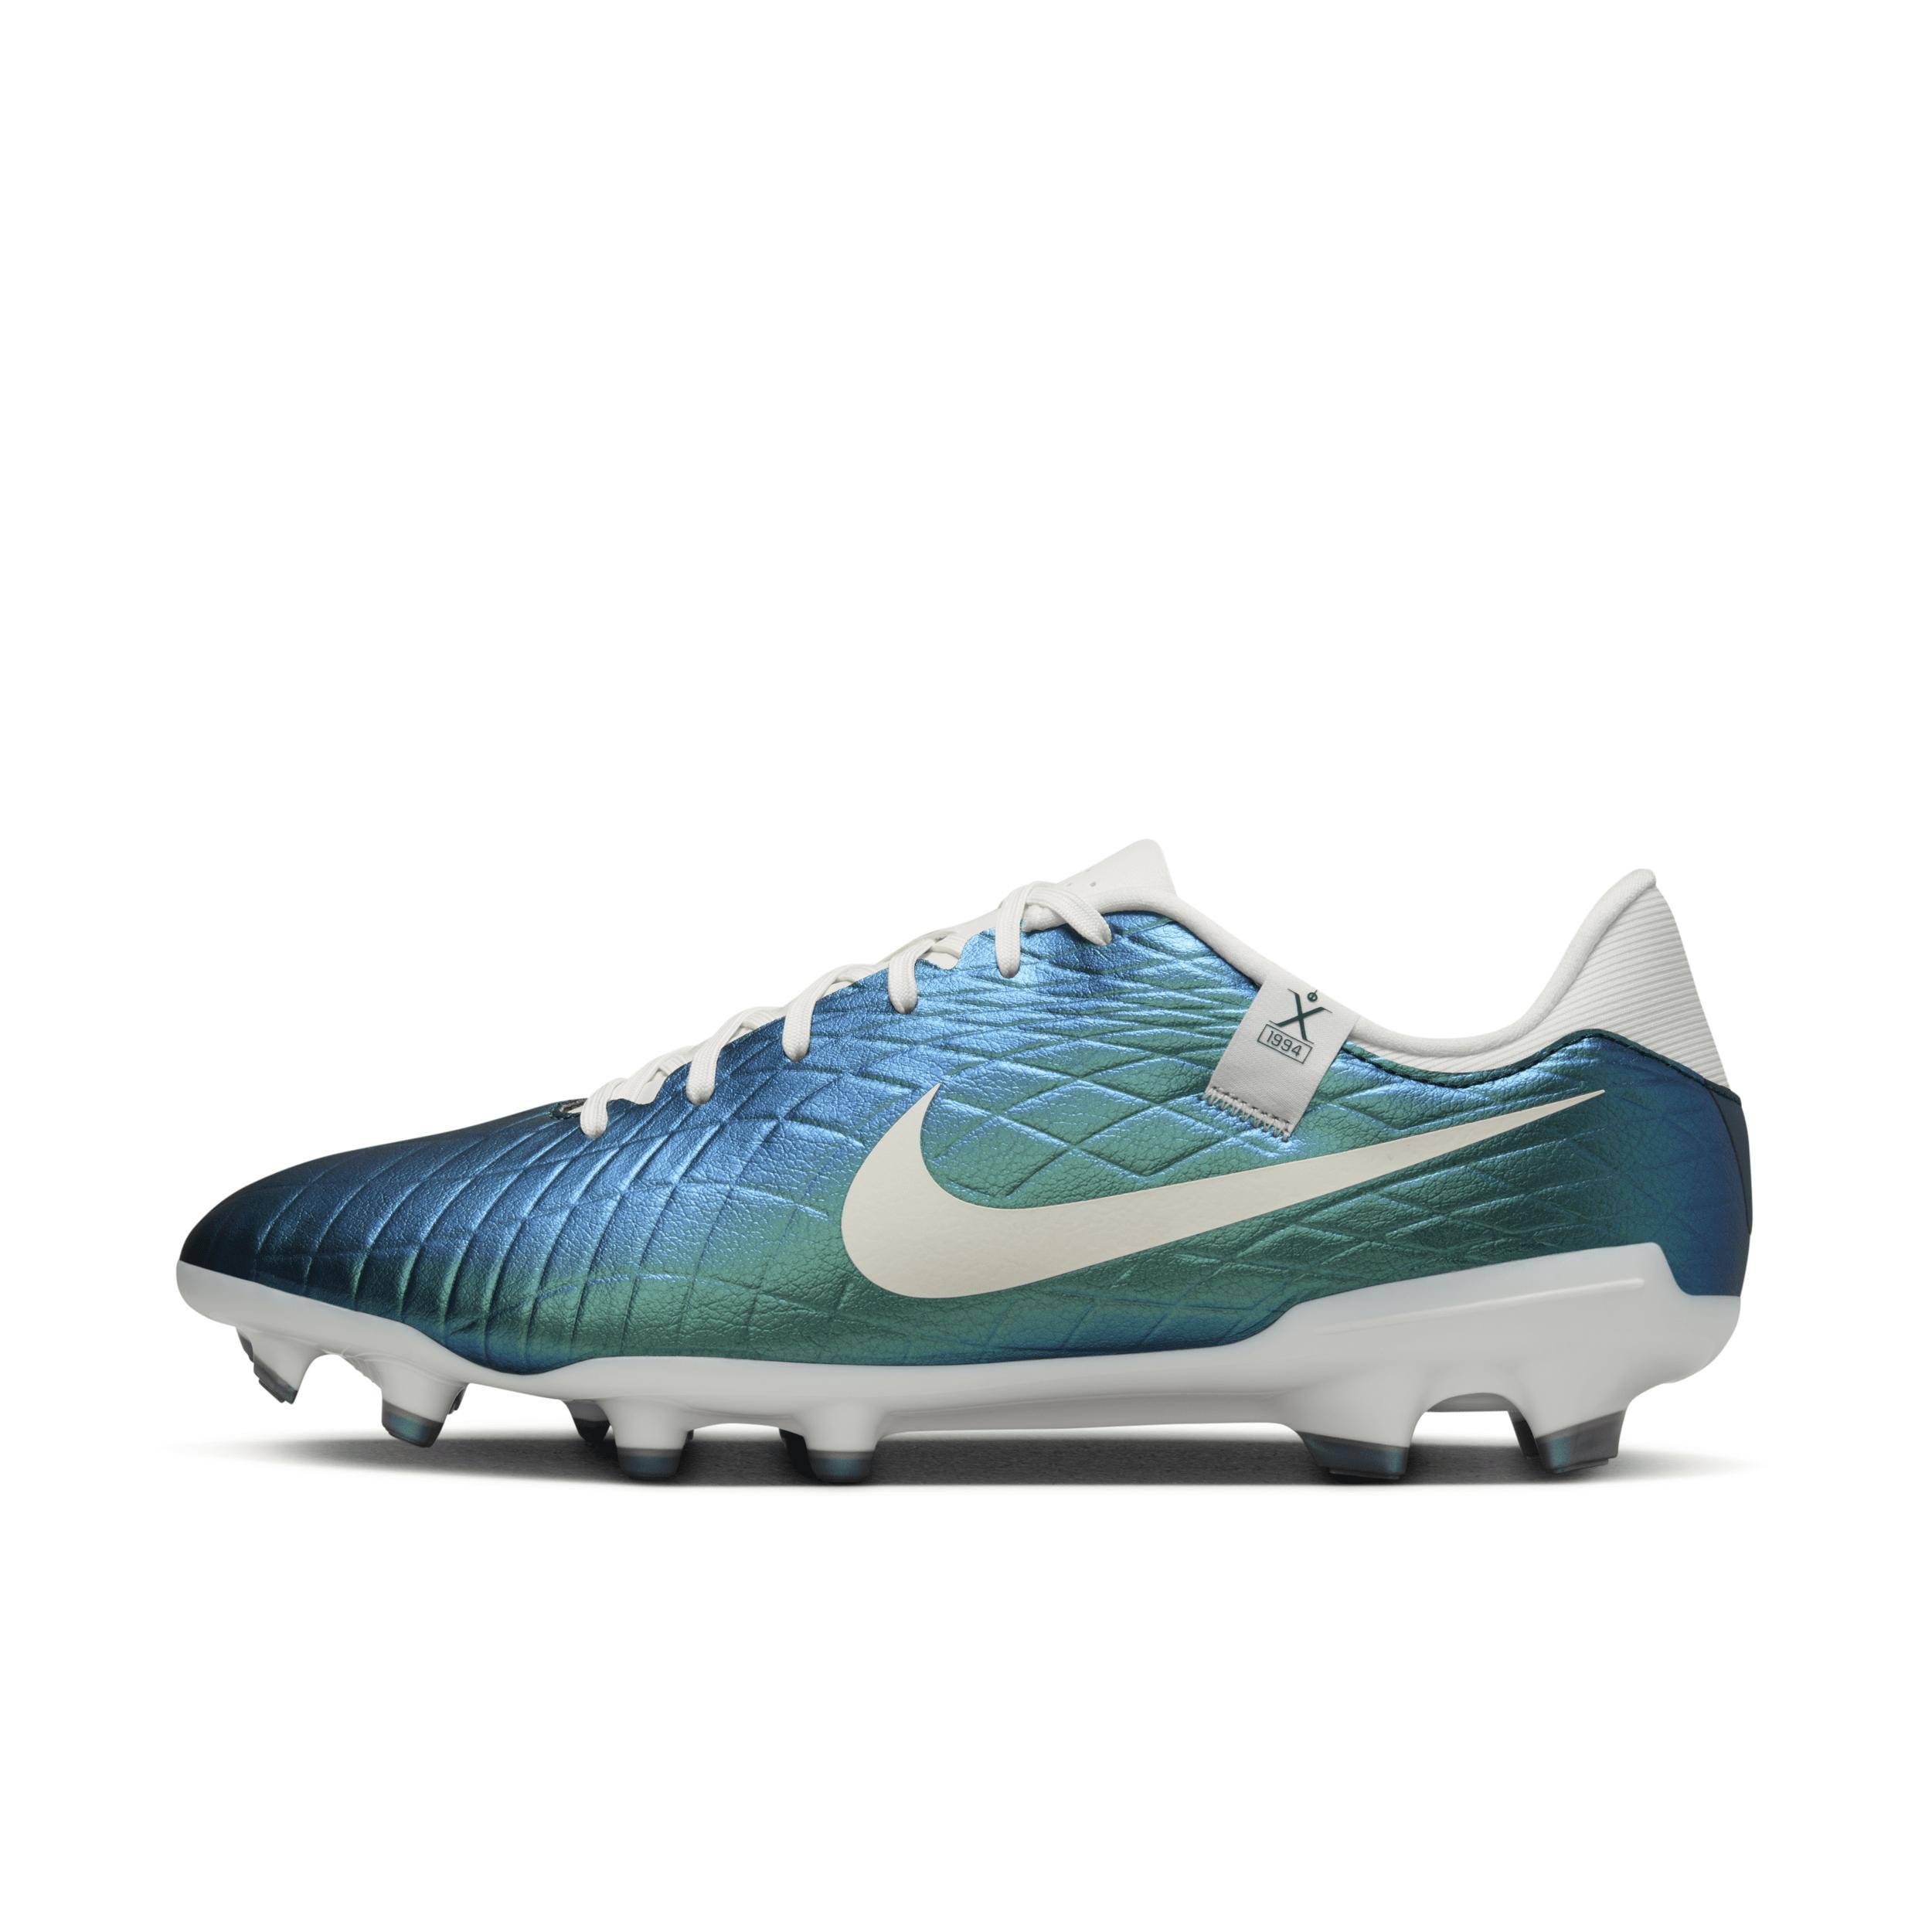 Nike Men's Tiempo Emerald Legend 10 Academy MG Low-Top Soccer Cleats by NIKE